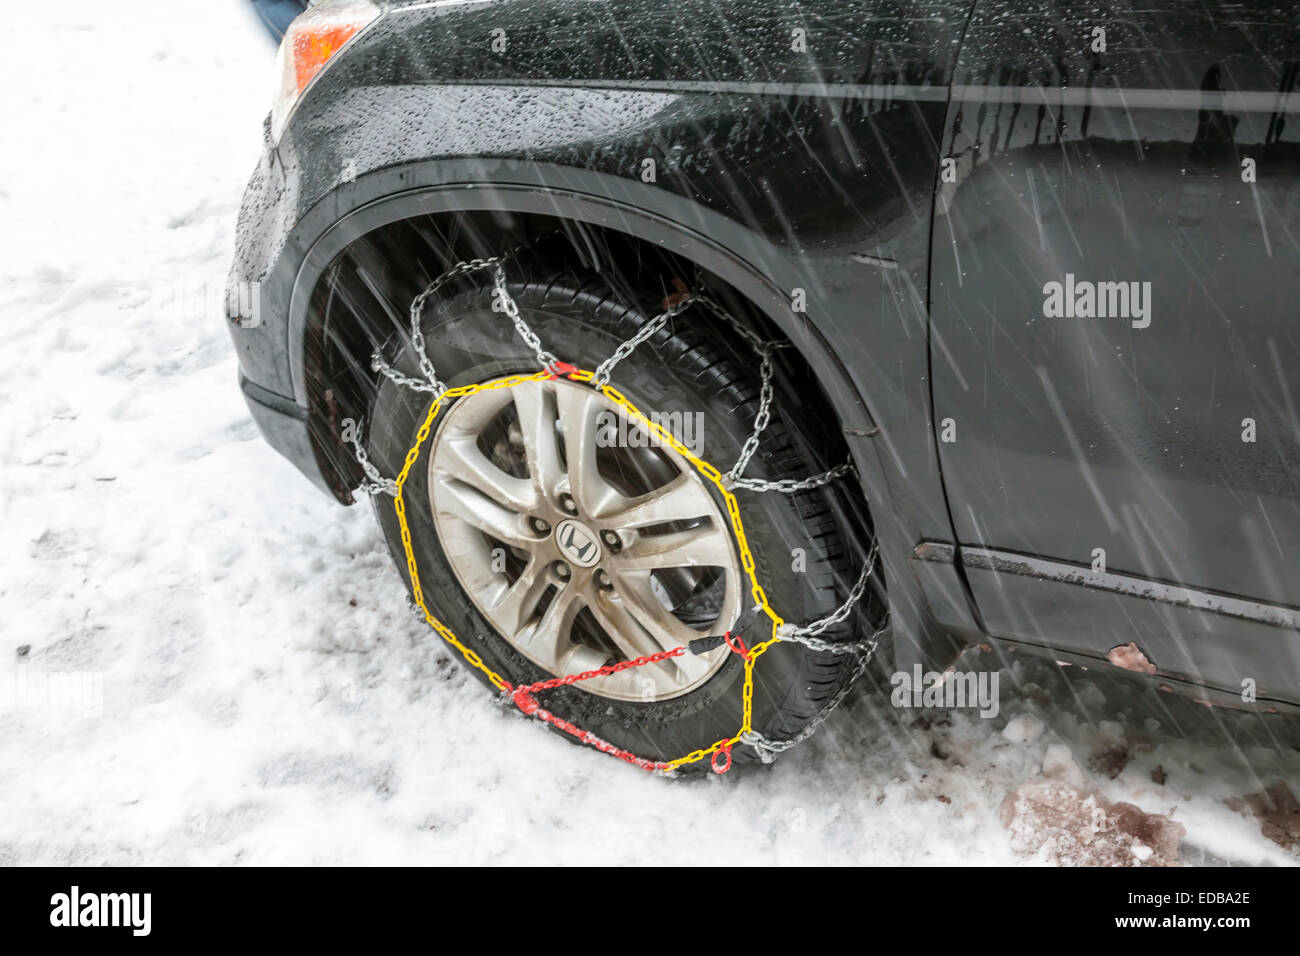 Snow chains installed on front wheel or tire of Honda passenger car on a snowy road while snowing. Stock Photo